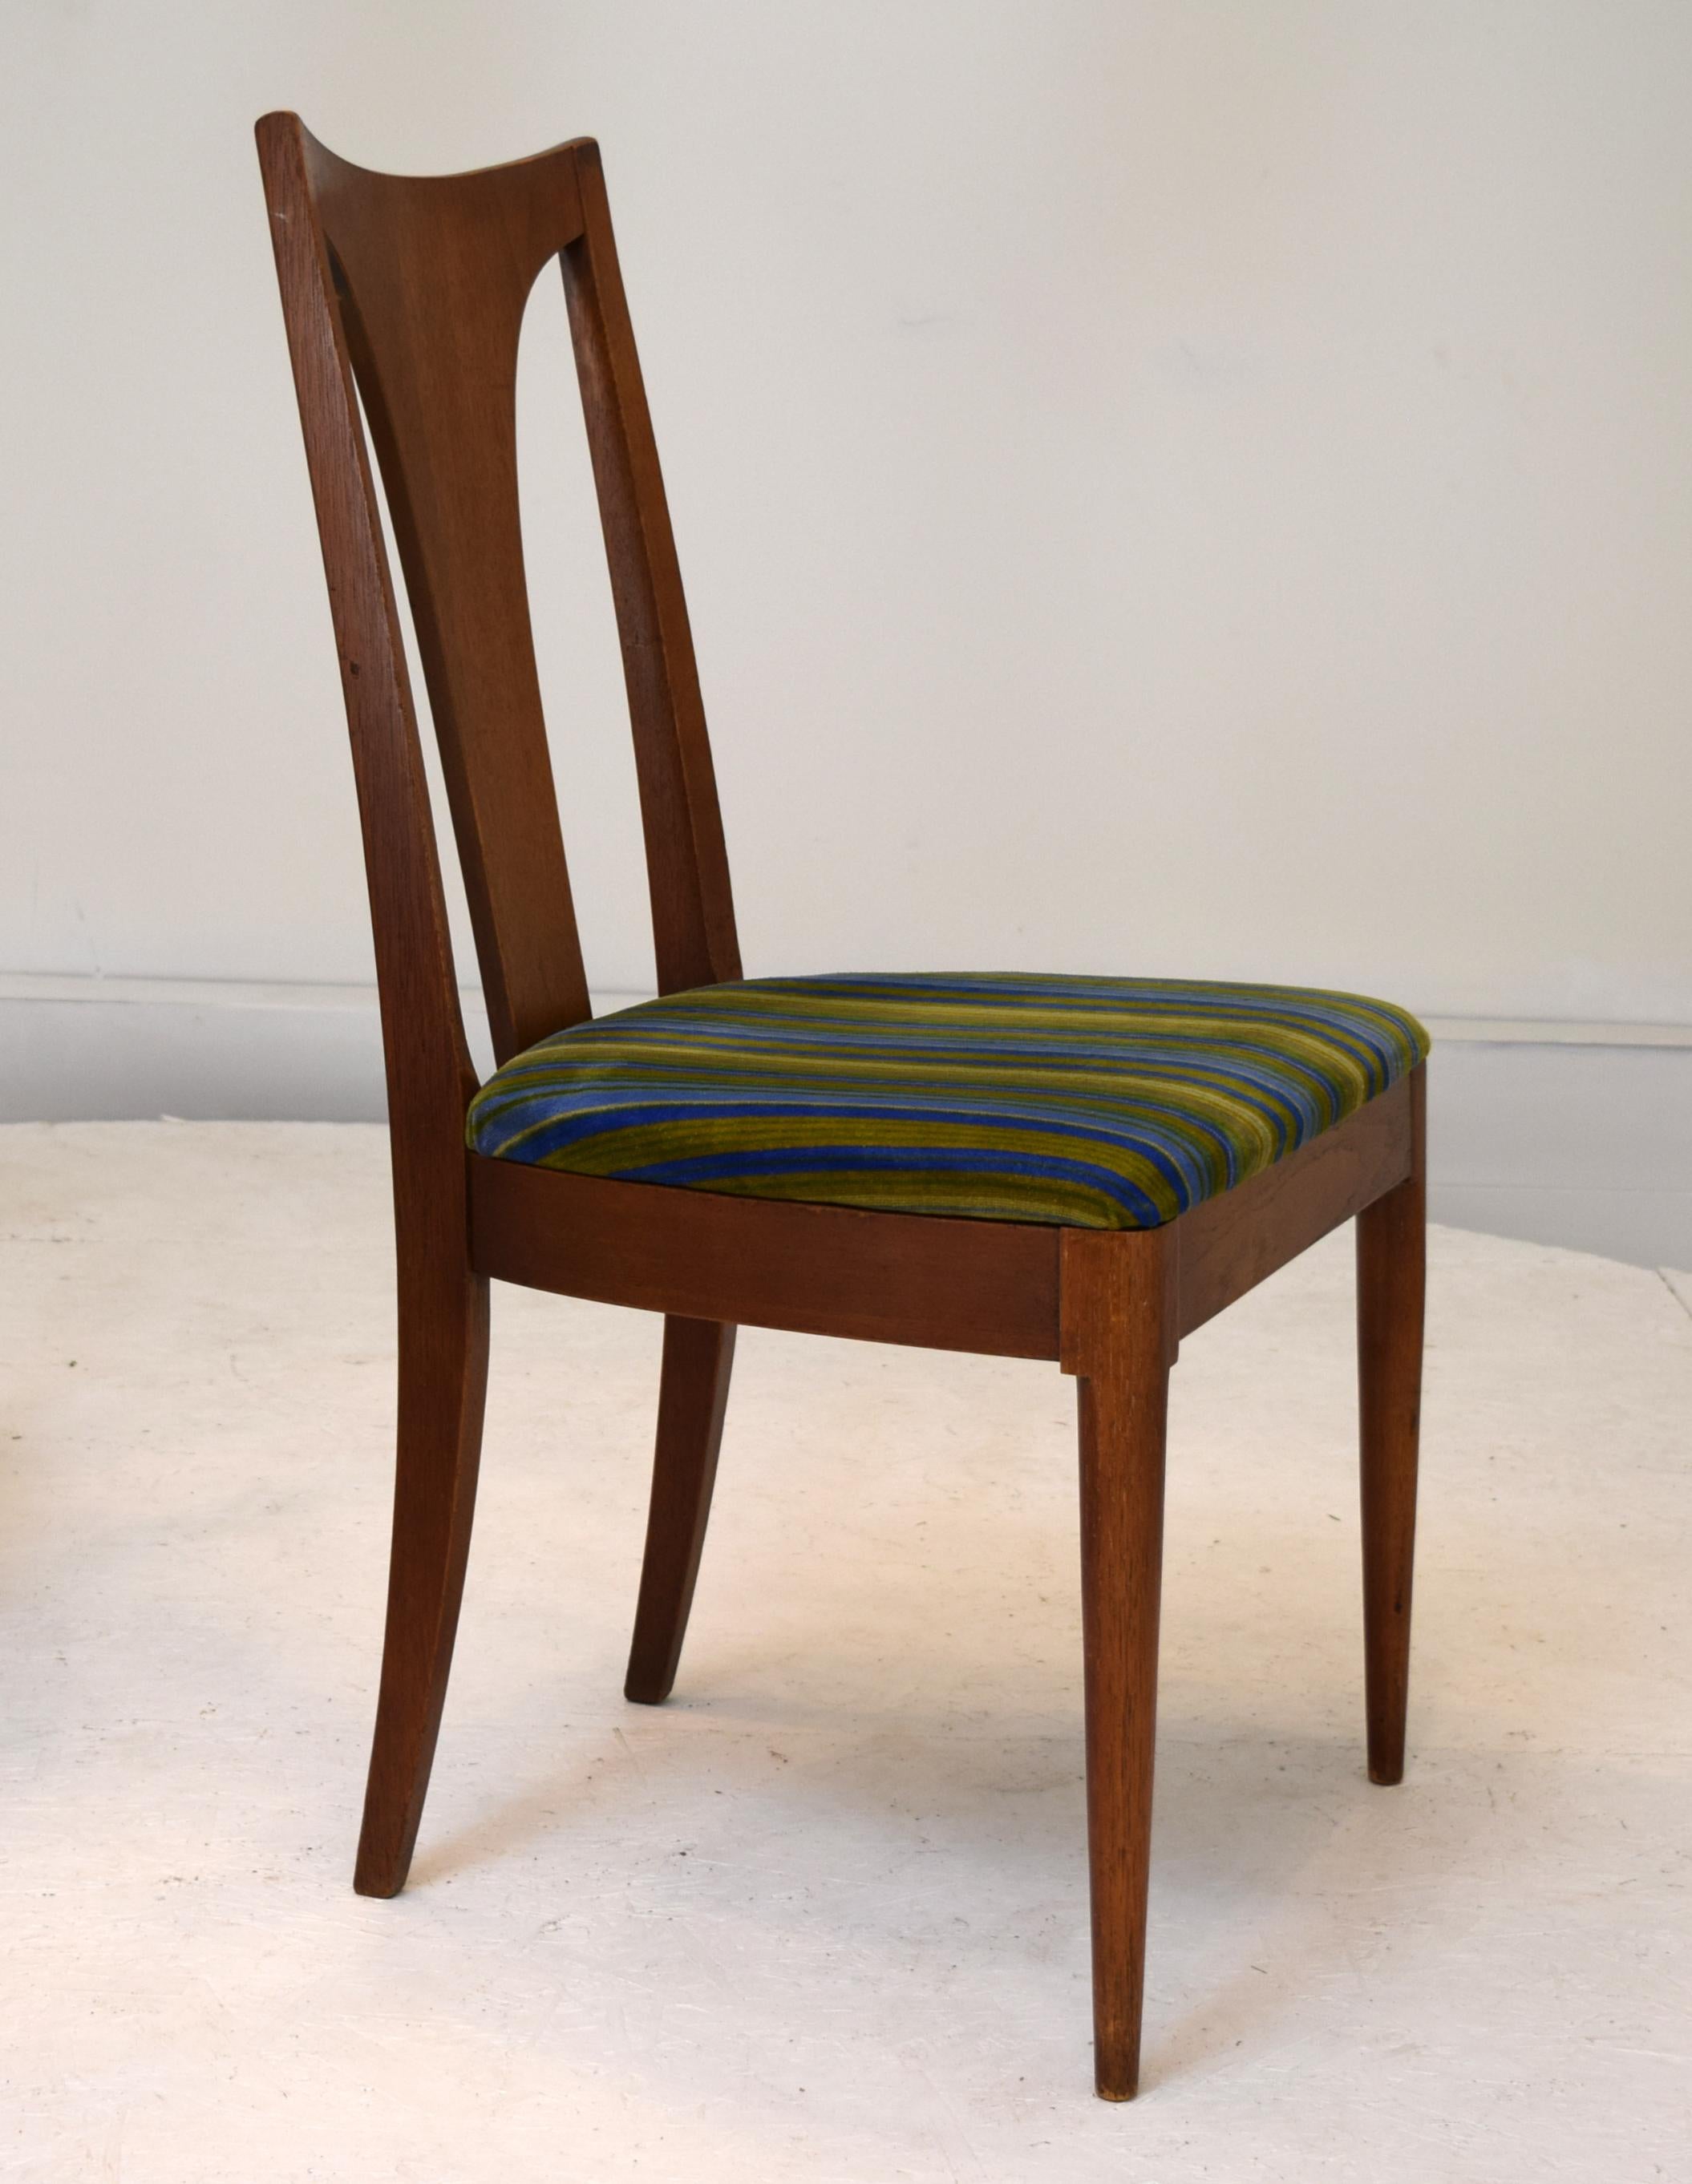 Saga Series by Broyhill circa 1956, set of 4 dining chairs with original upholstery. Walnut, birch. Mild marks to frames, entirely sturdy and no repairs. Upholstery could benefit from replacement. Measures 18.5